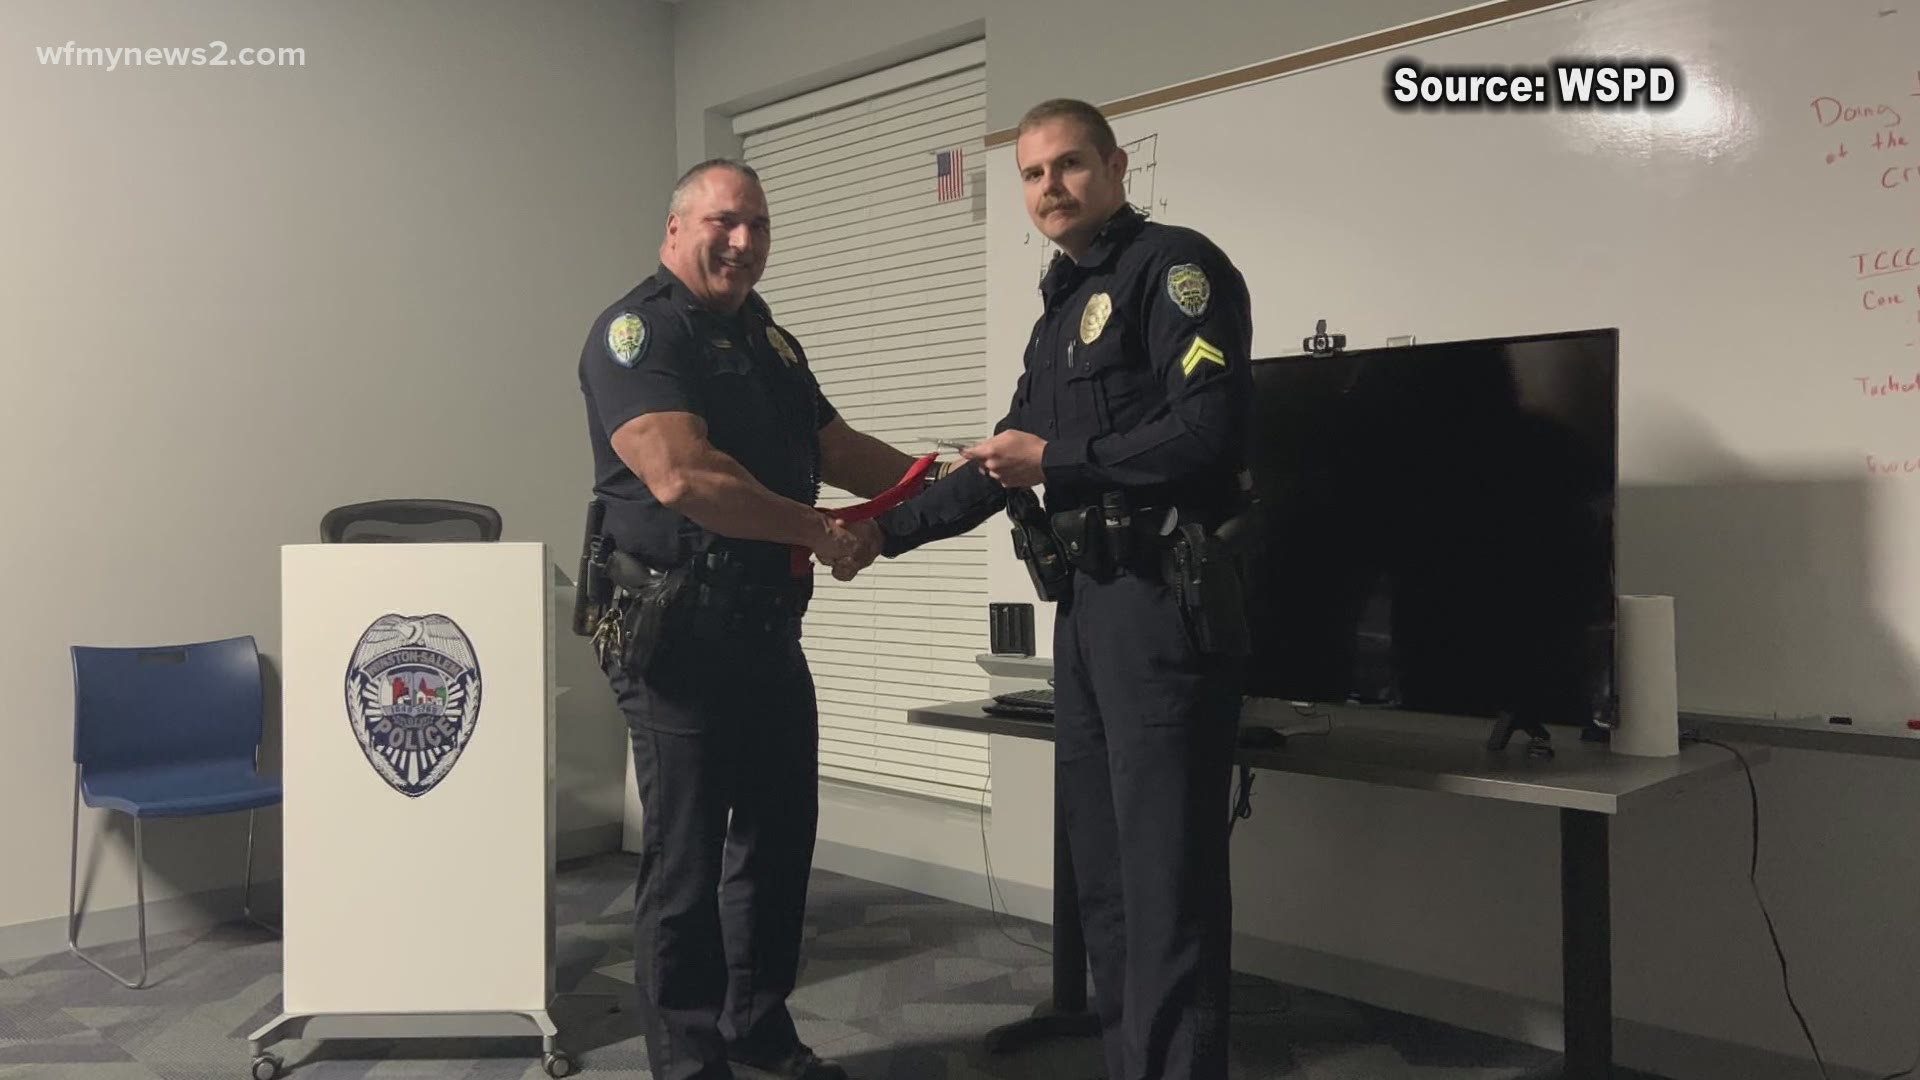 Corporal Seth Reynolds saved the life of one of his fellow officers after they responded to a shooting at a Winston-Salem sanitation building in December 2019.